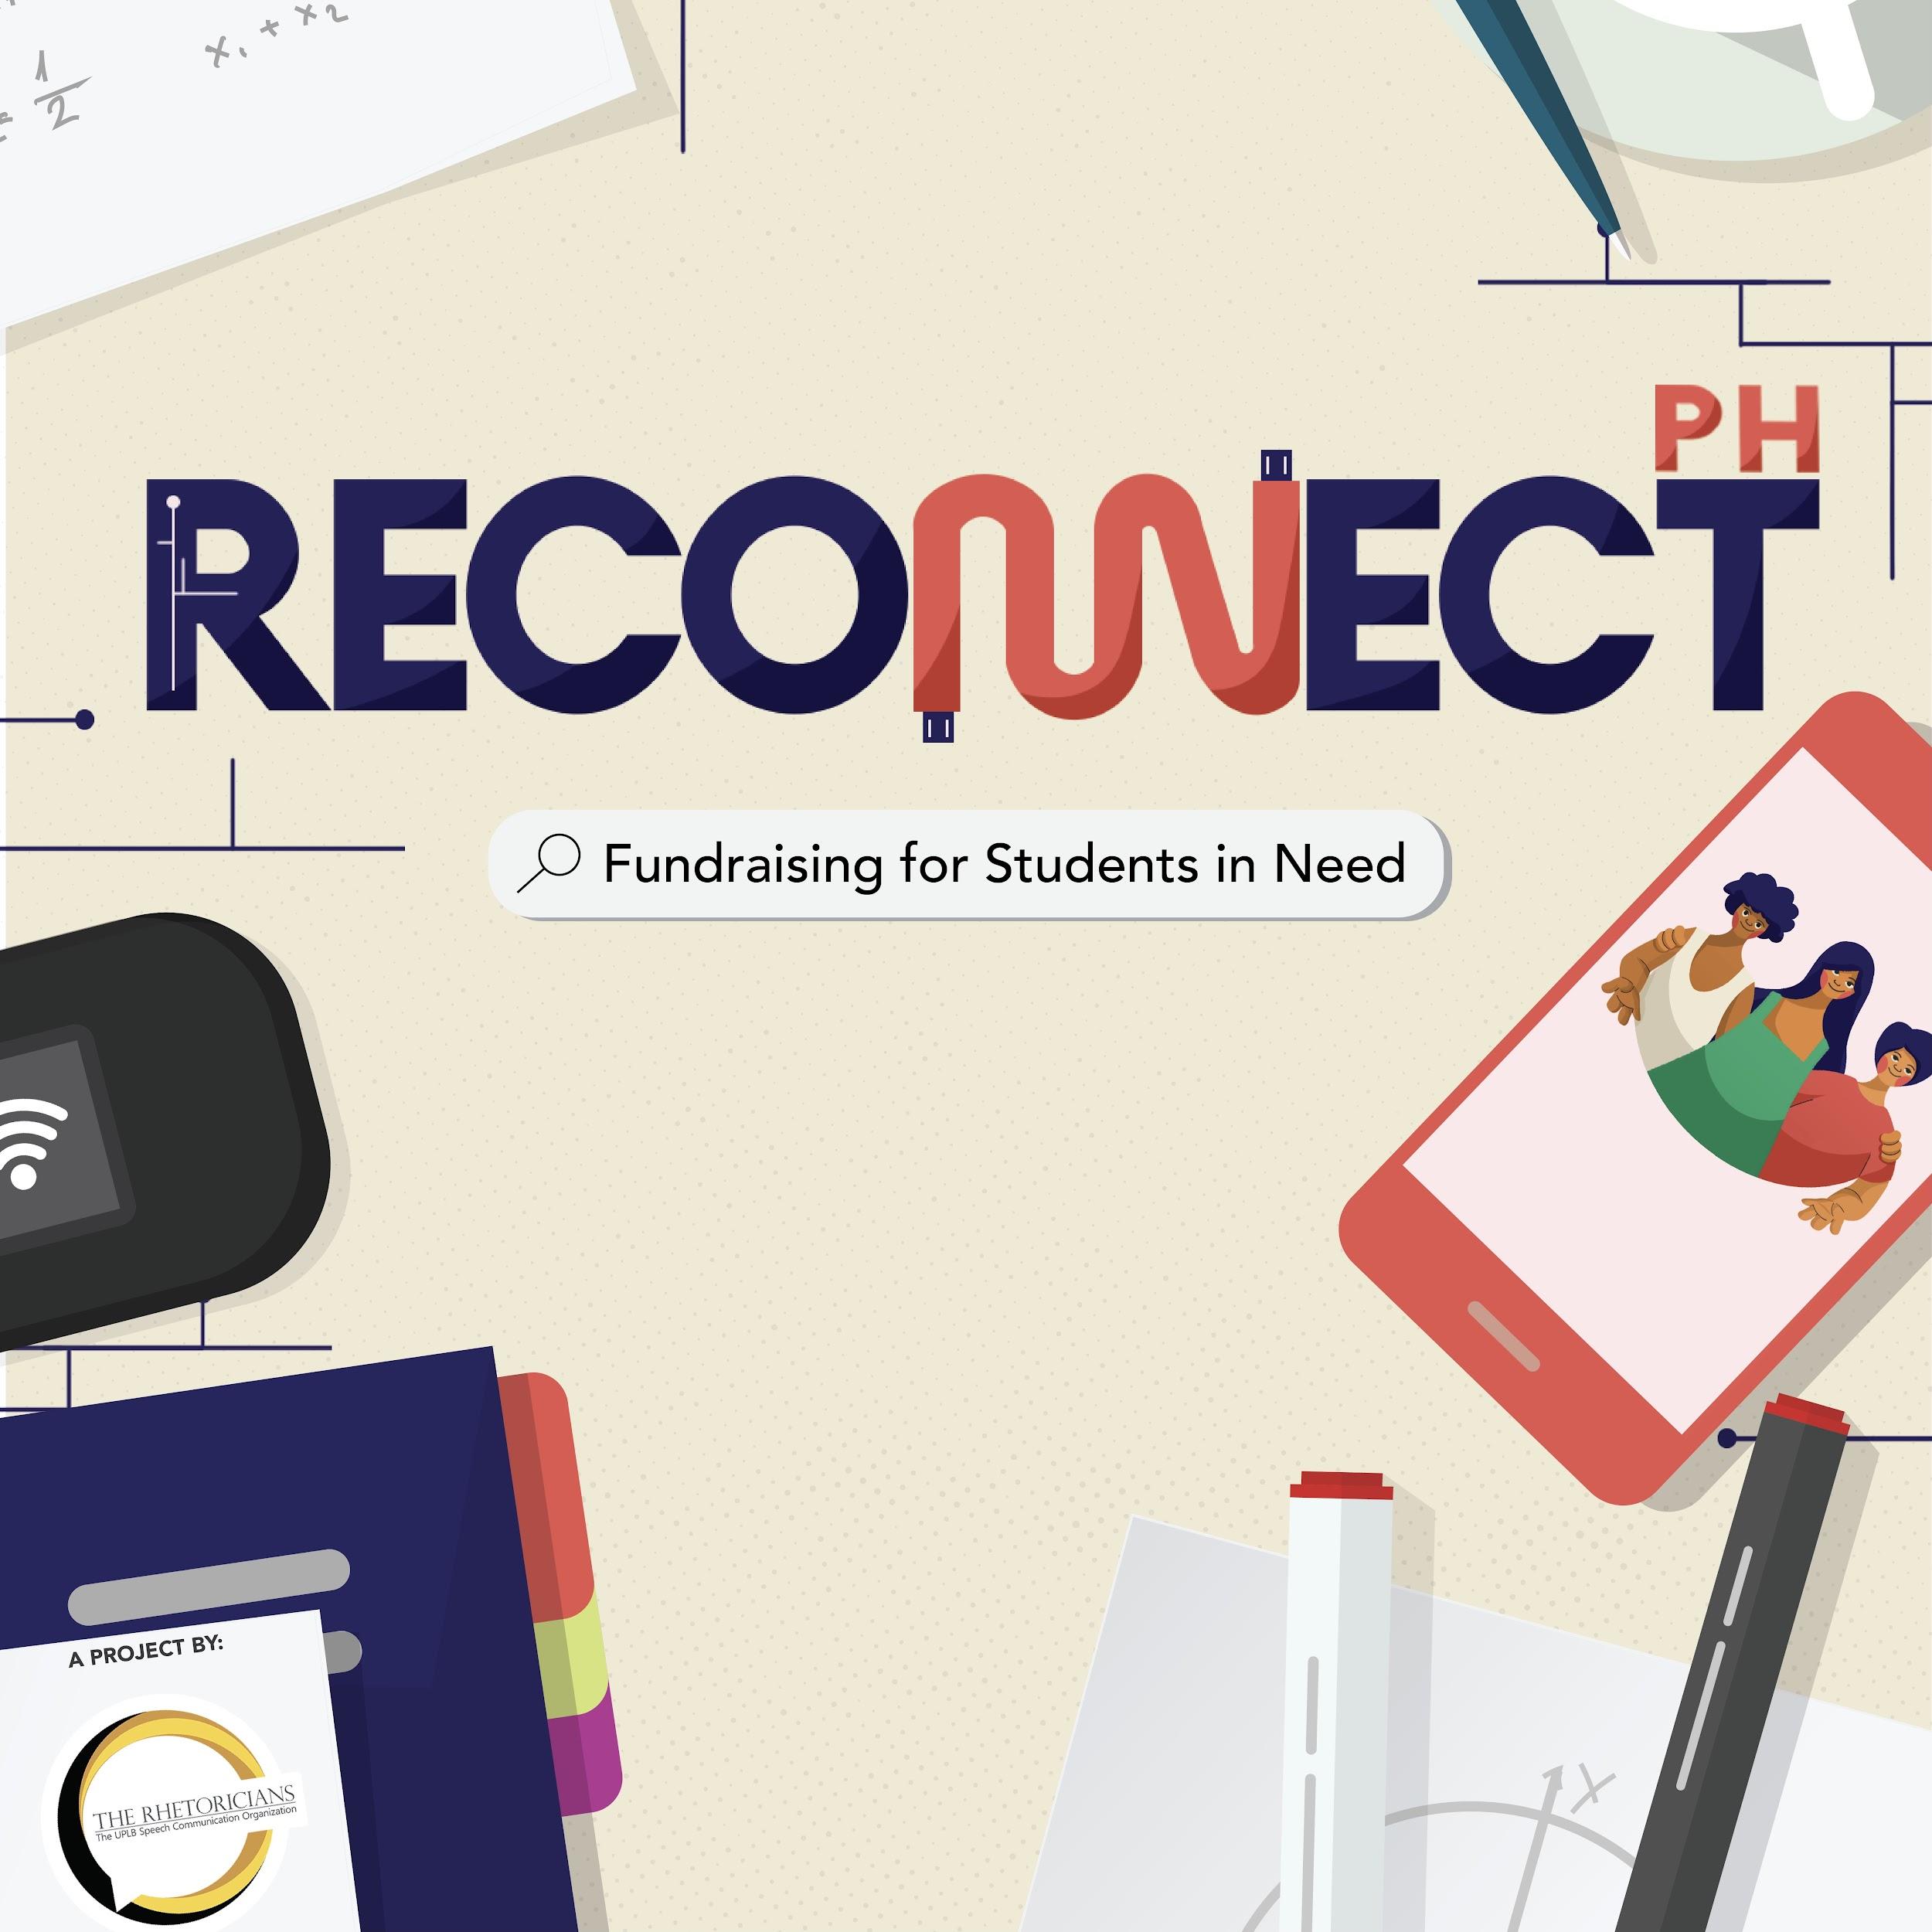 Reconnecting students and dreams through an online initiative